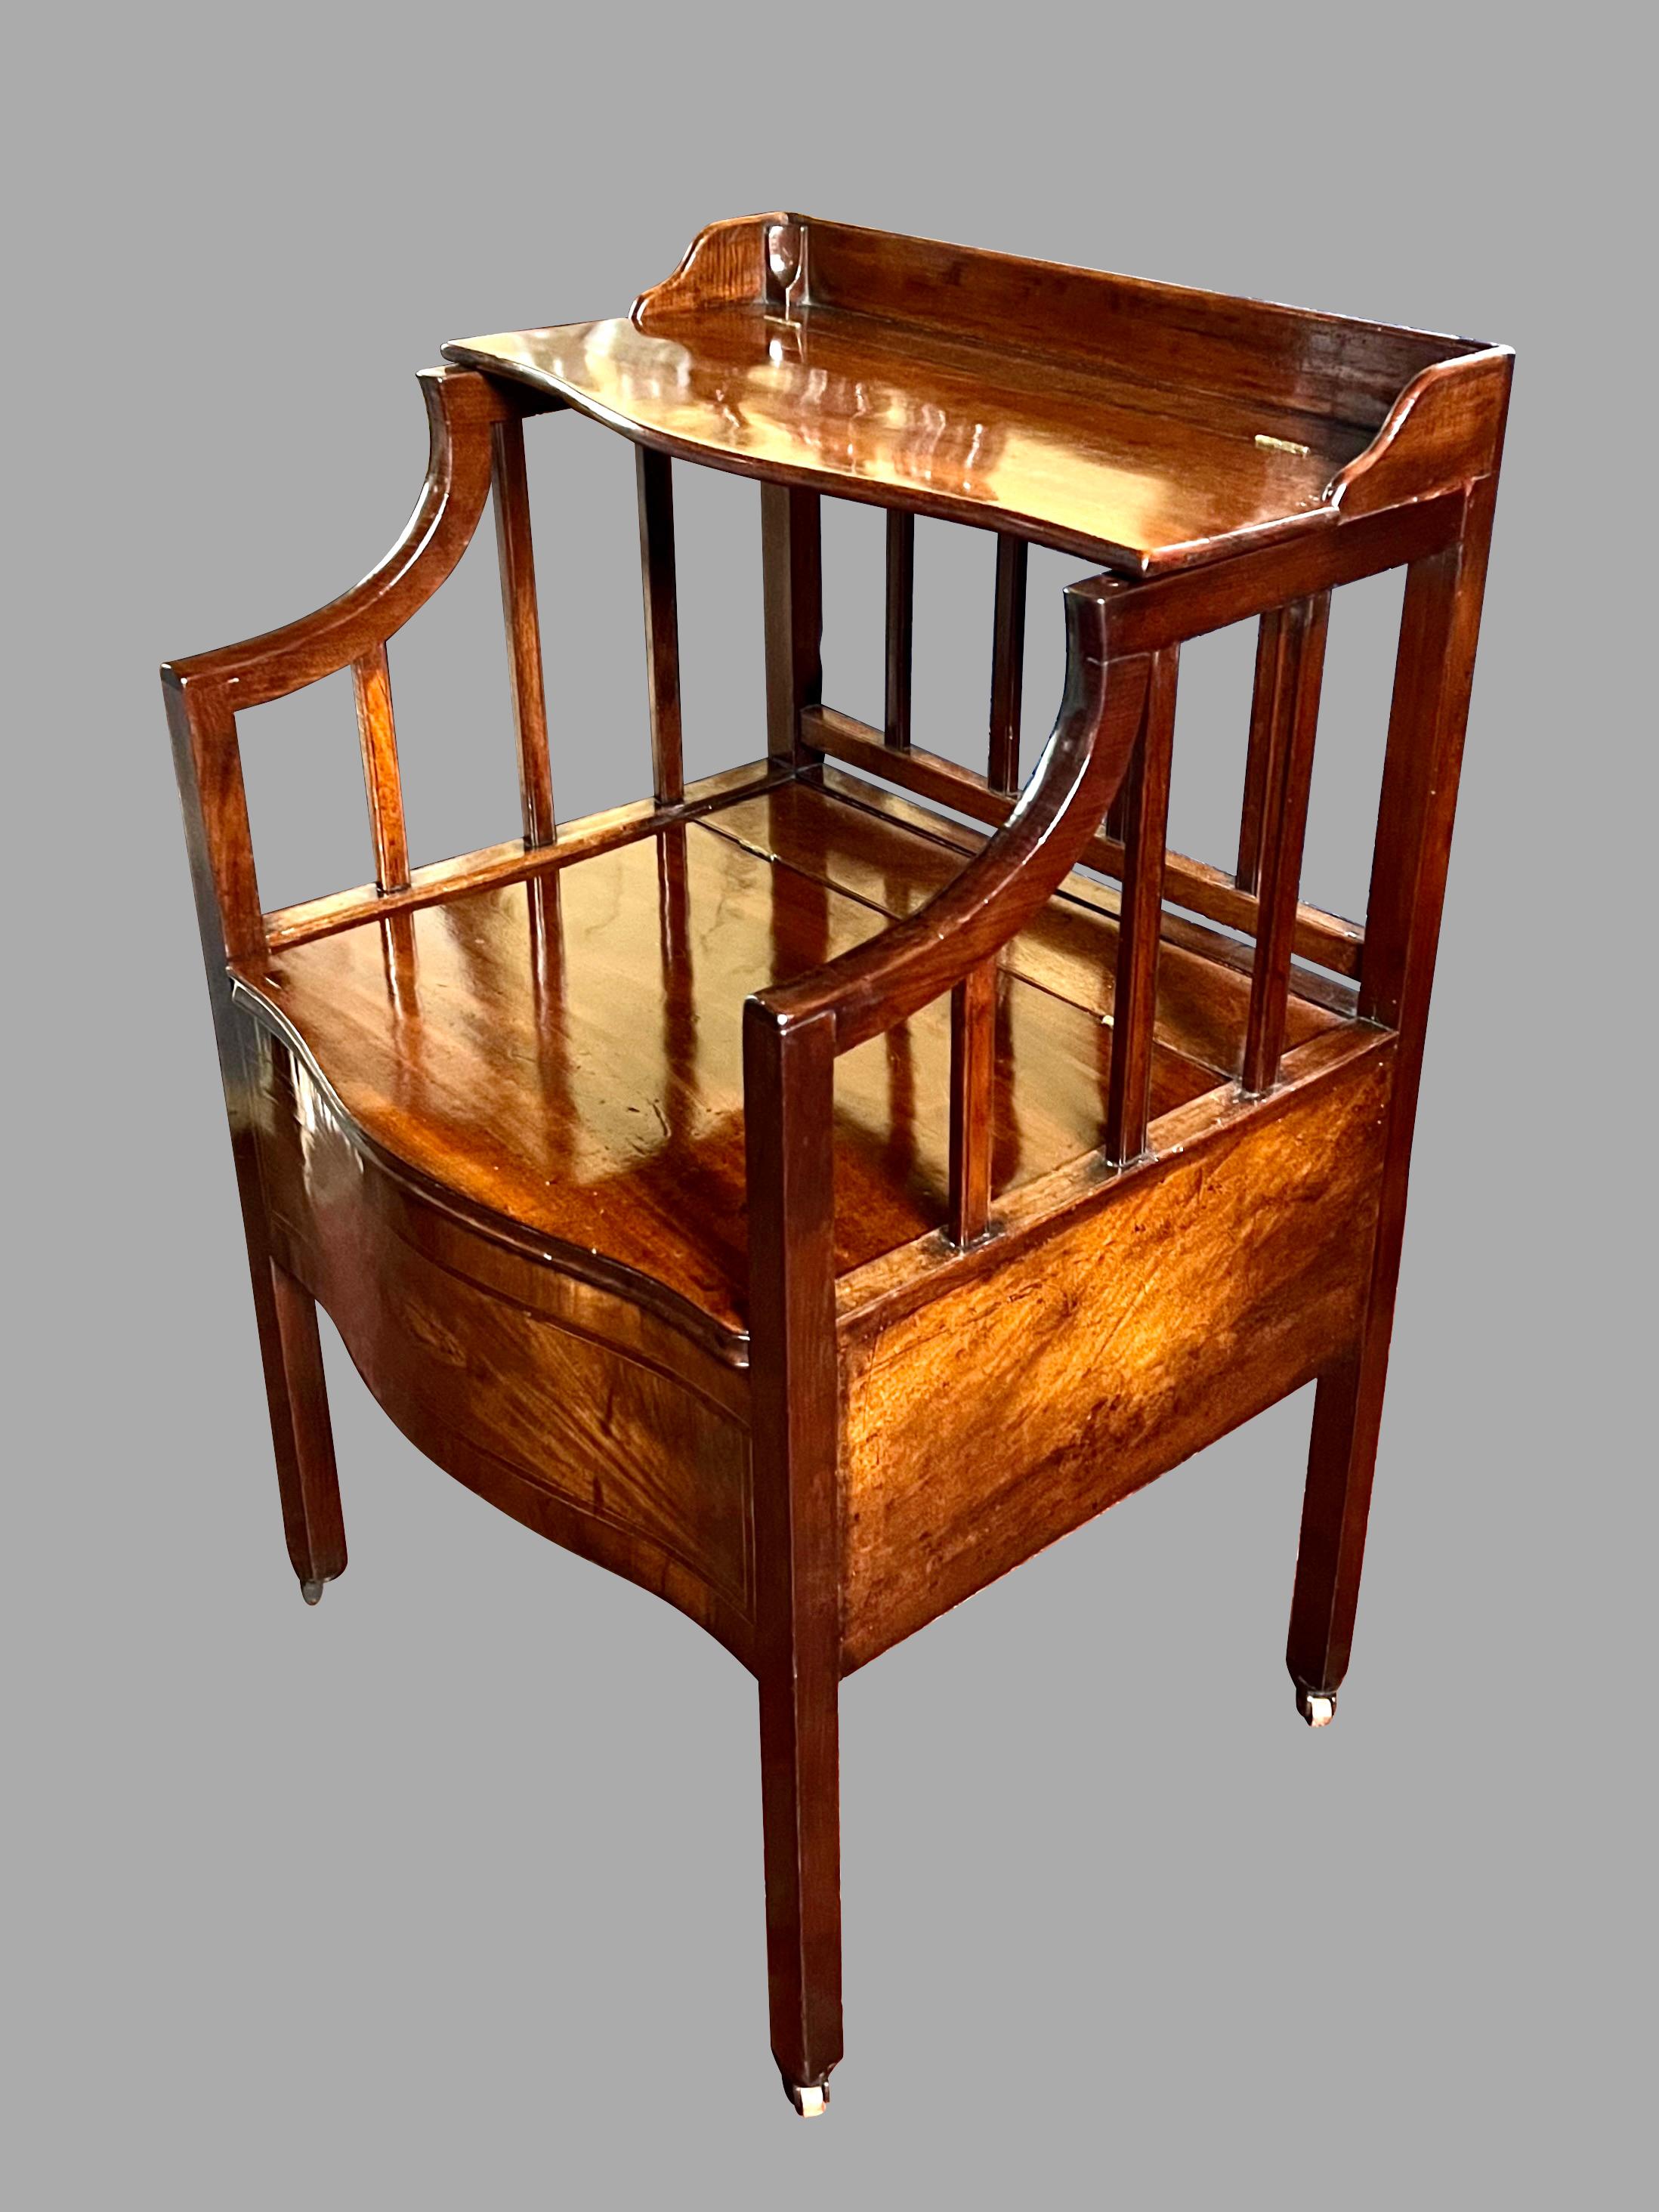 Early 19th Century English George III Period Inlaid Mahogany Serpentine Form Bedside Commode For Sale